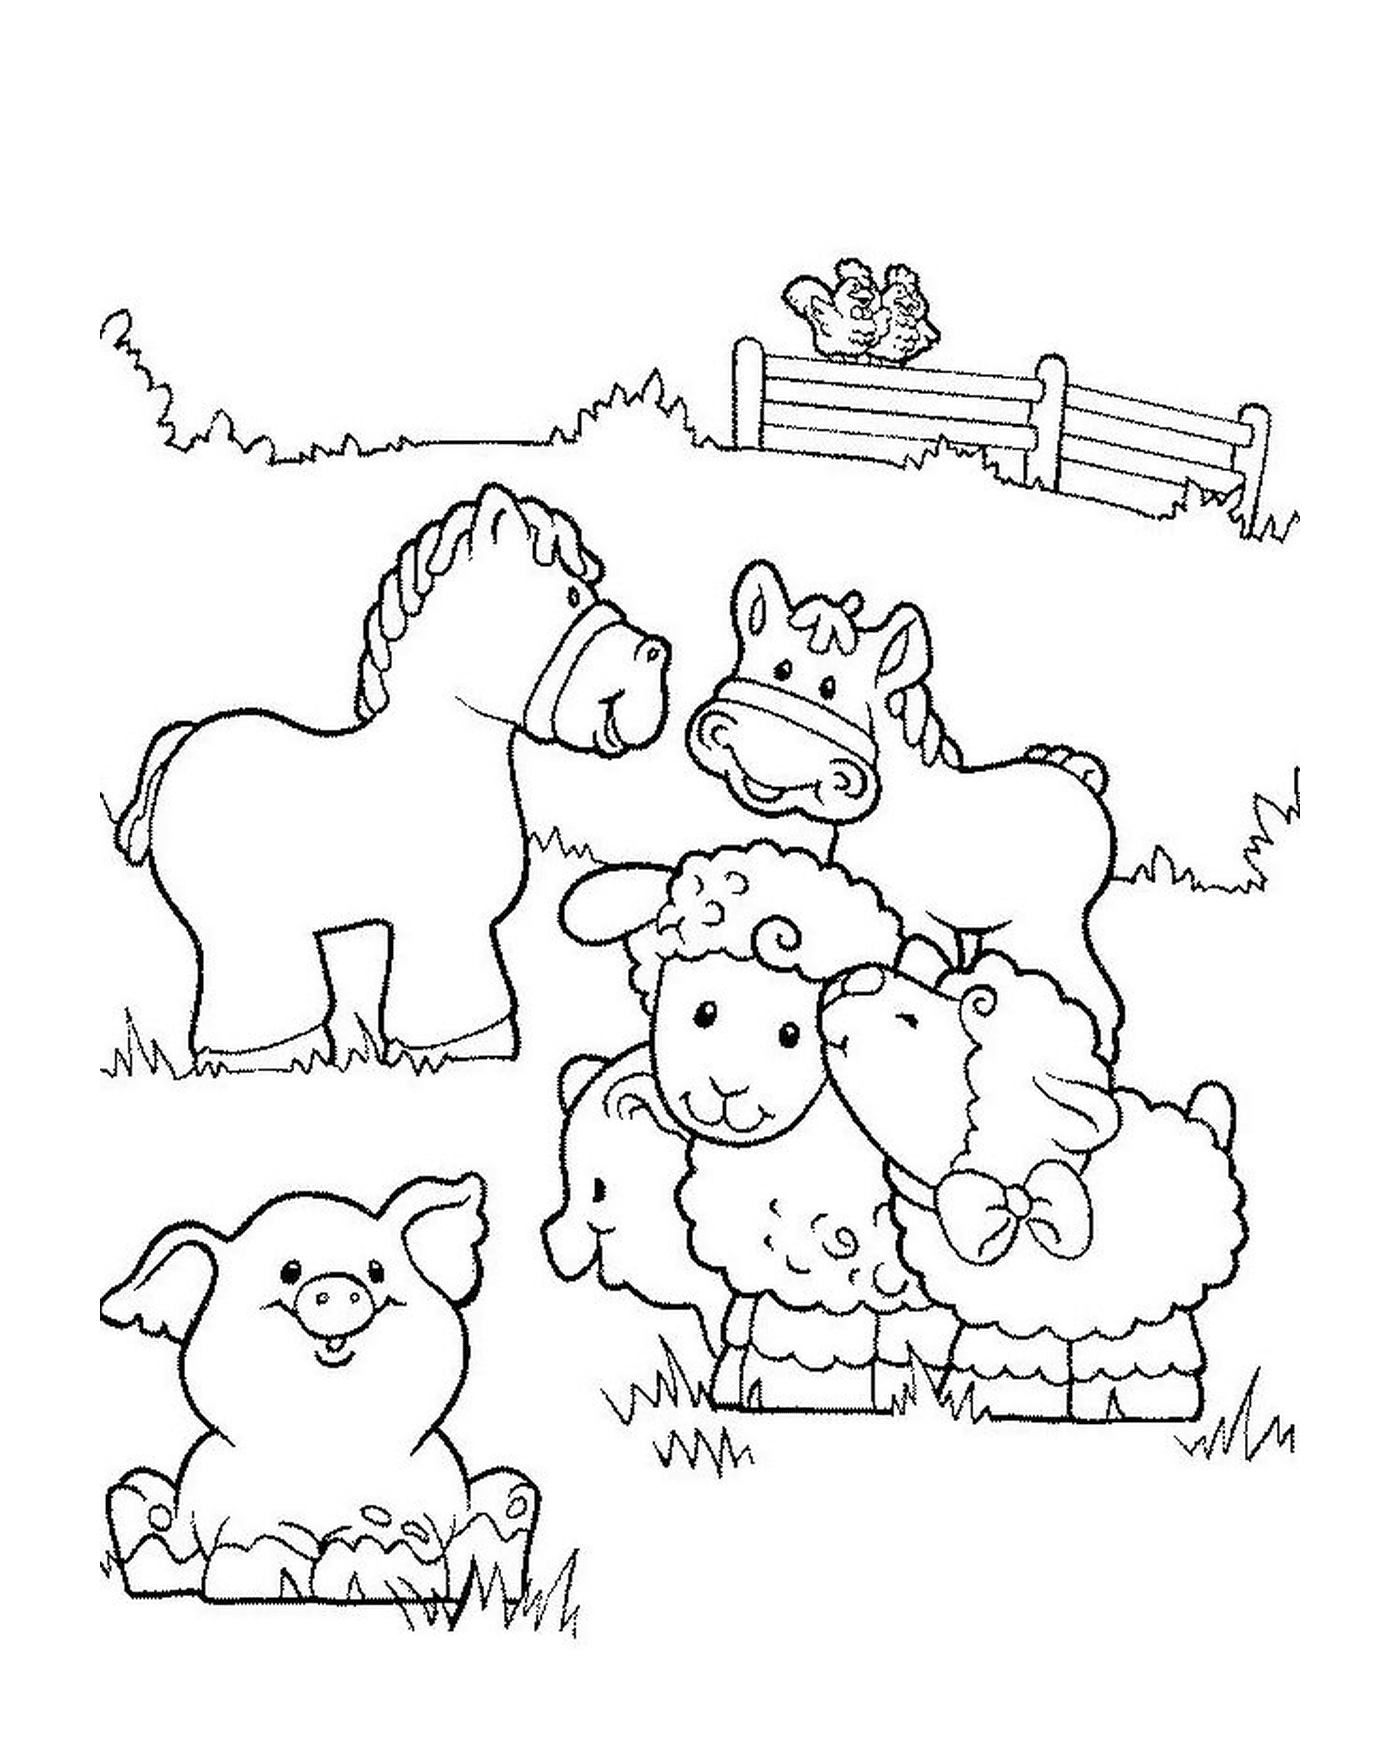  a horse, a sheep and a pig 